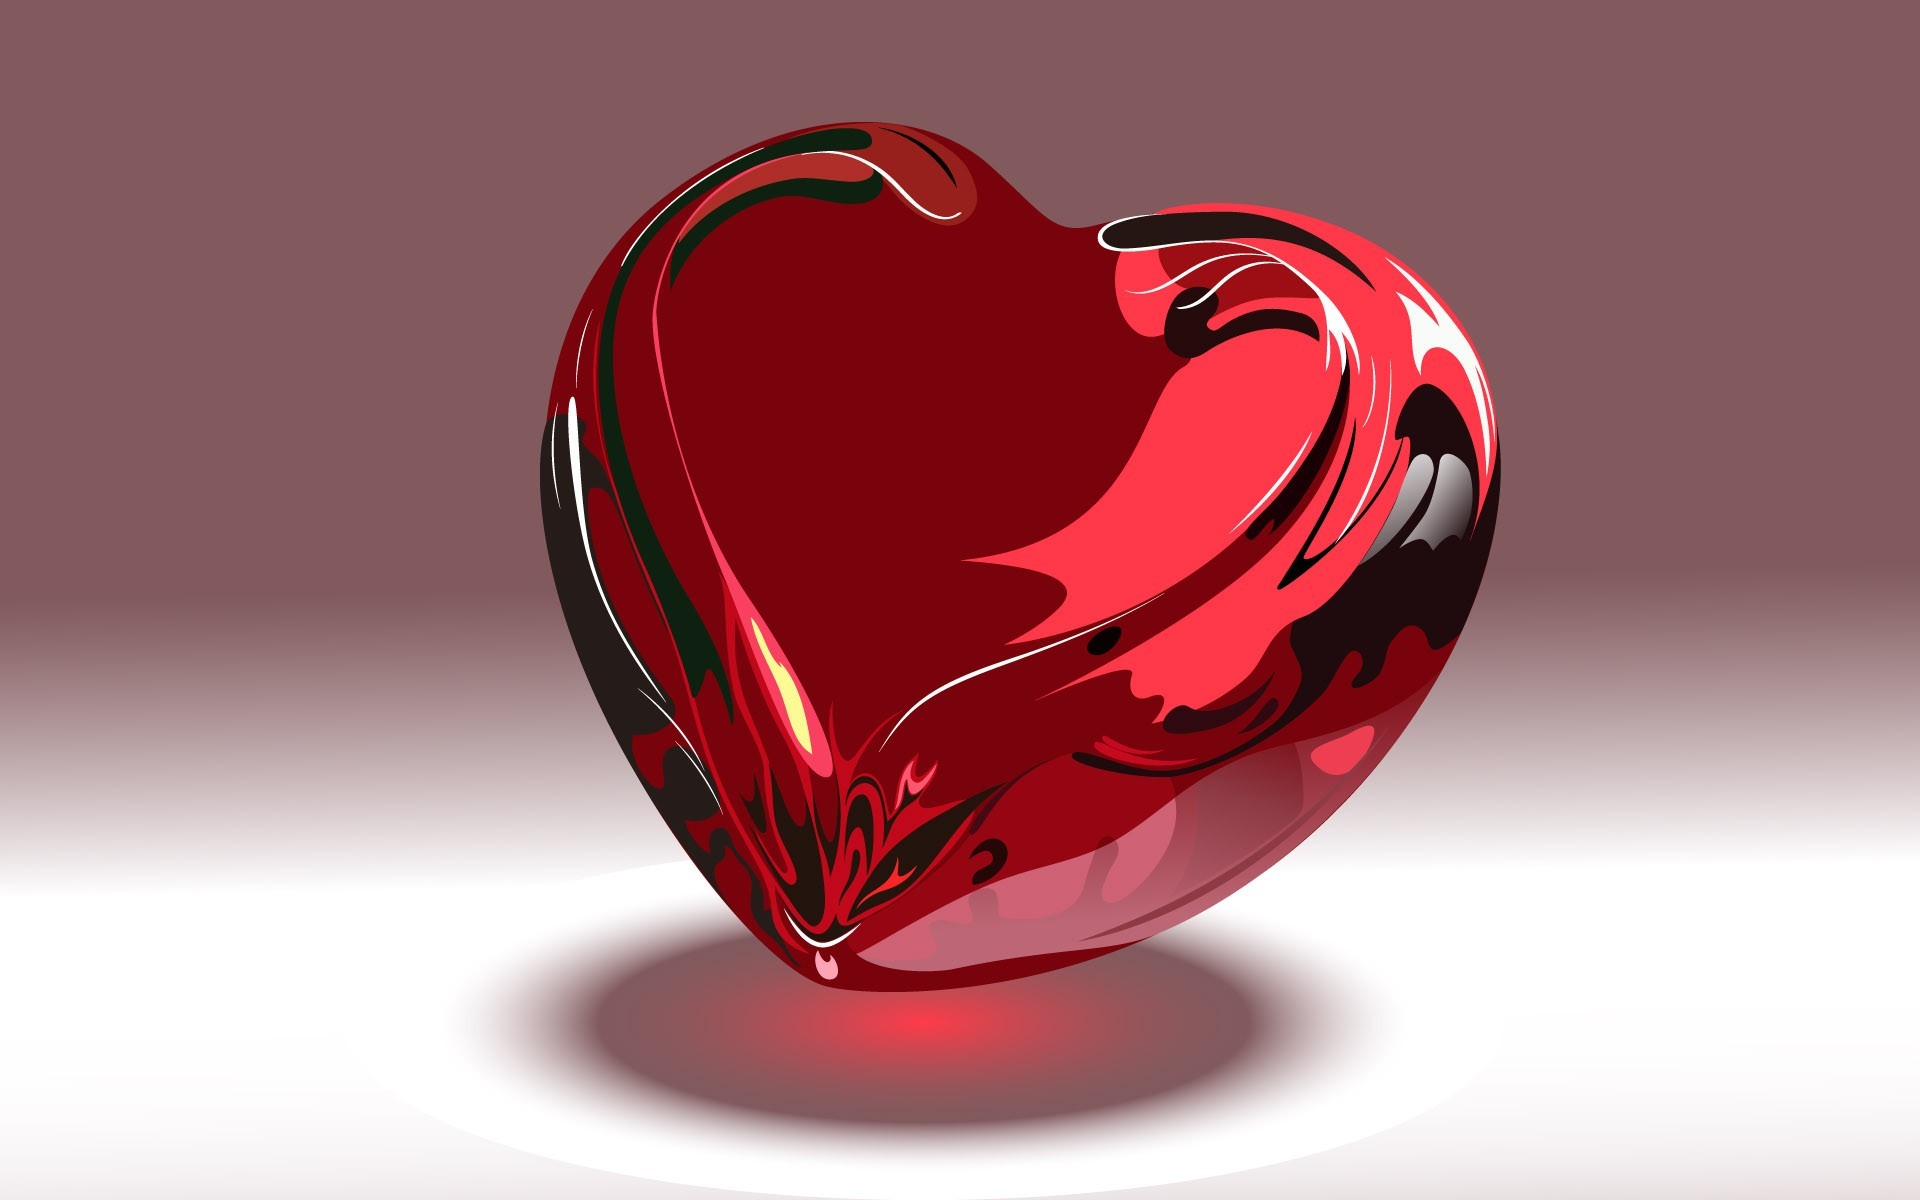 Red Heart Background Images - Free Download on Freepik, Red Hearts 